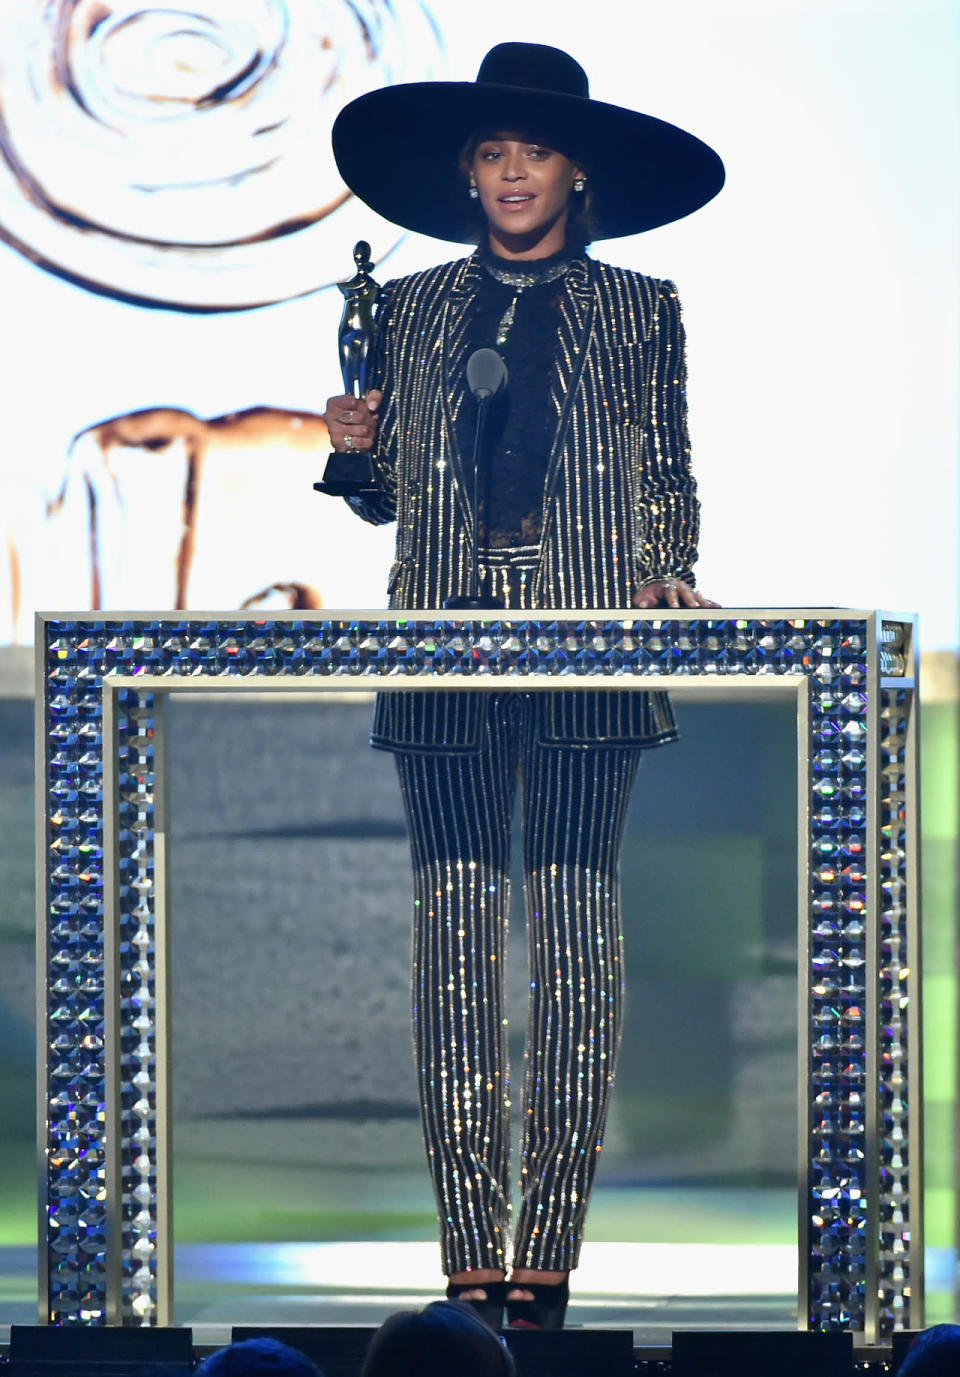 Beyoncé wearing a sequin-striped suit from Givenchy with an oversized hat 